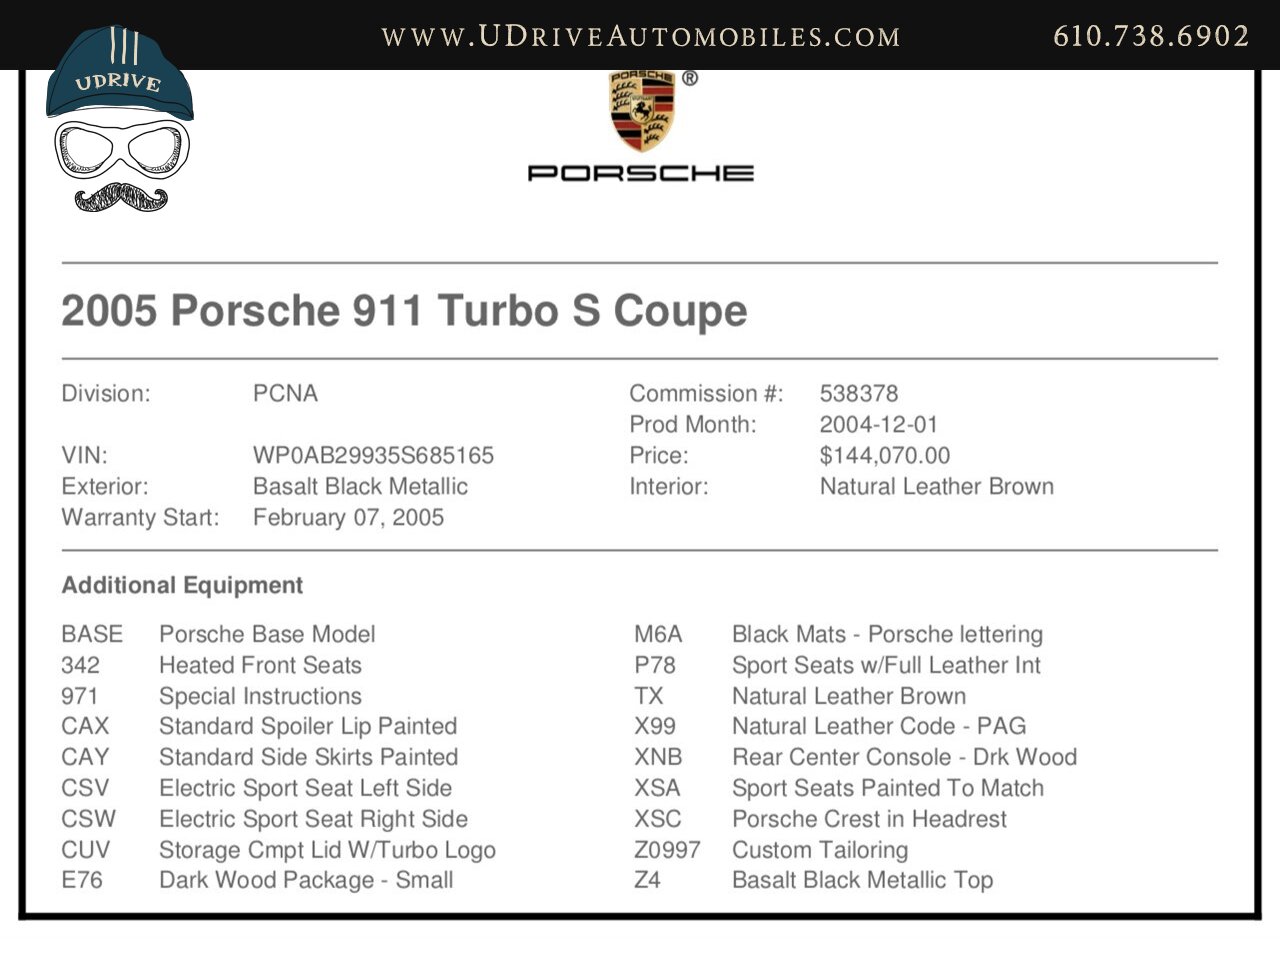 2005 Porsche 911 Turbo S 6 Speed 14k Miles Sport Sts Painted Backs  Natural Brown Lthr $144,070 MSRP - Photo 2 - West Chester, PA 19382